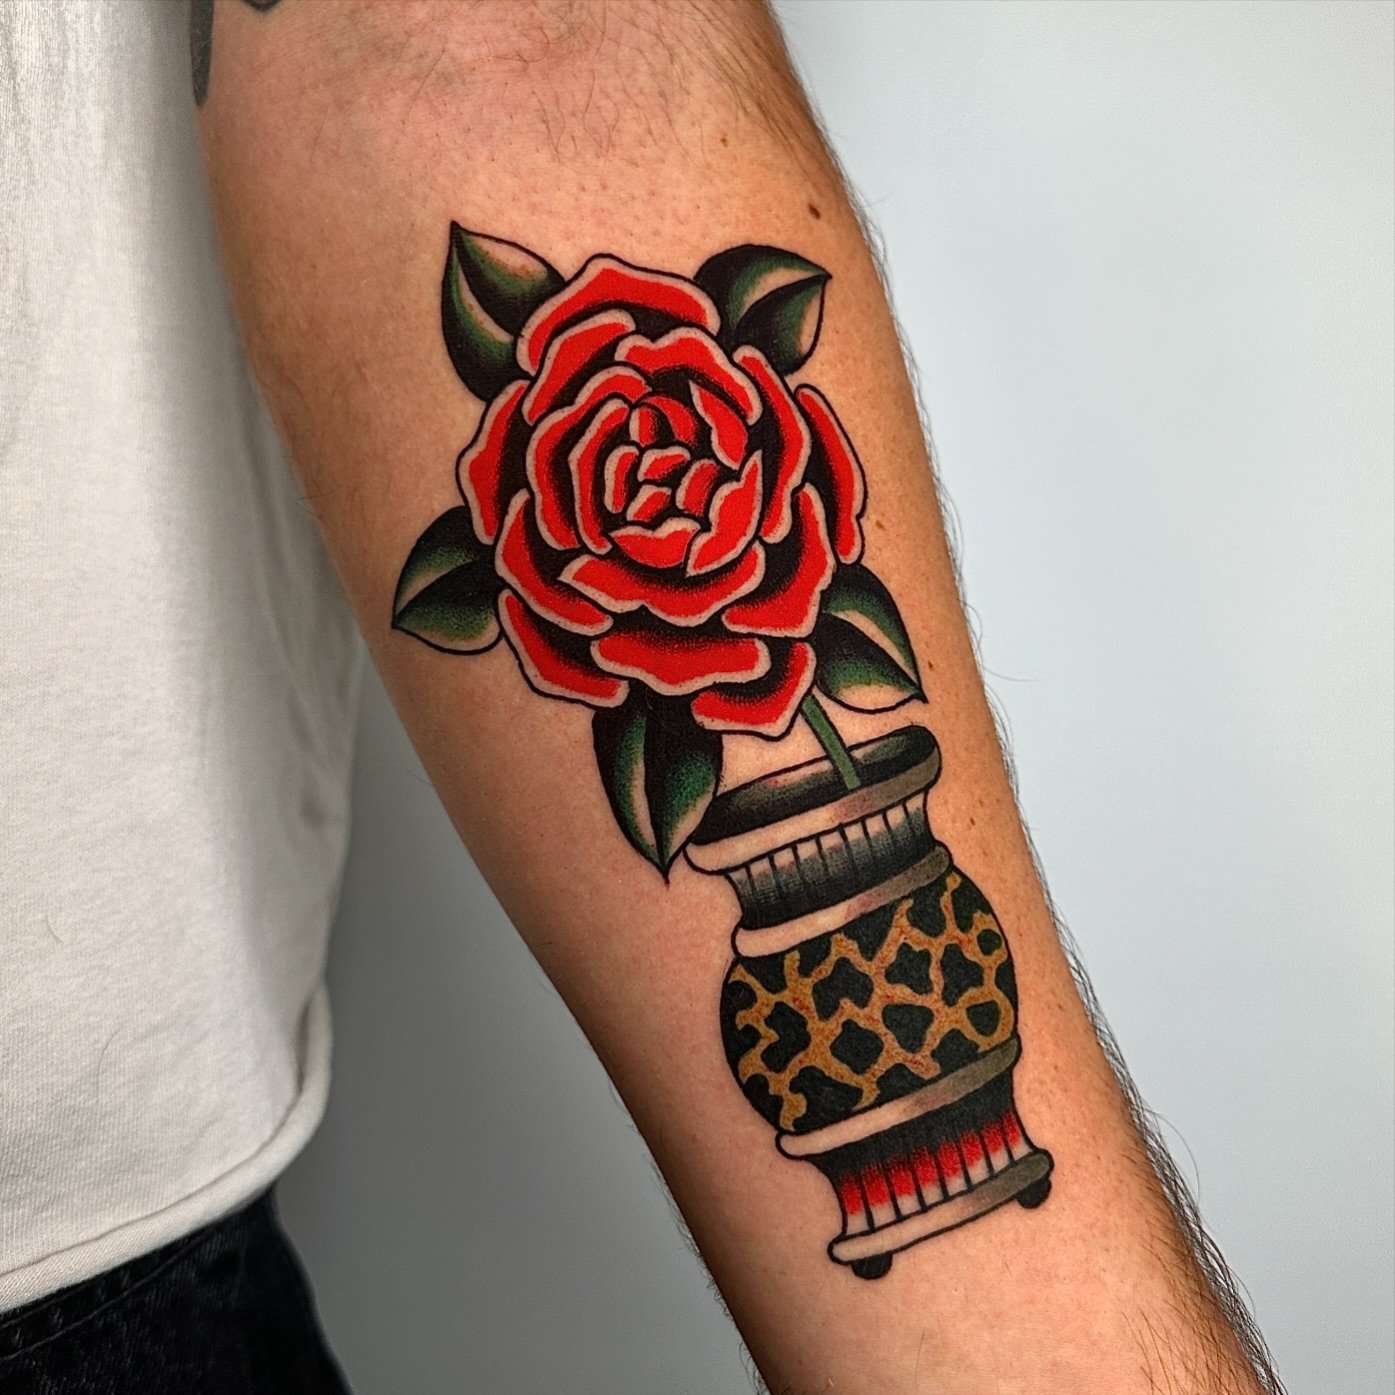 Tattoo by @totalnothing!

For appointments, contact Jason directly or use the booking link in our bio.